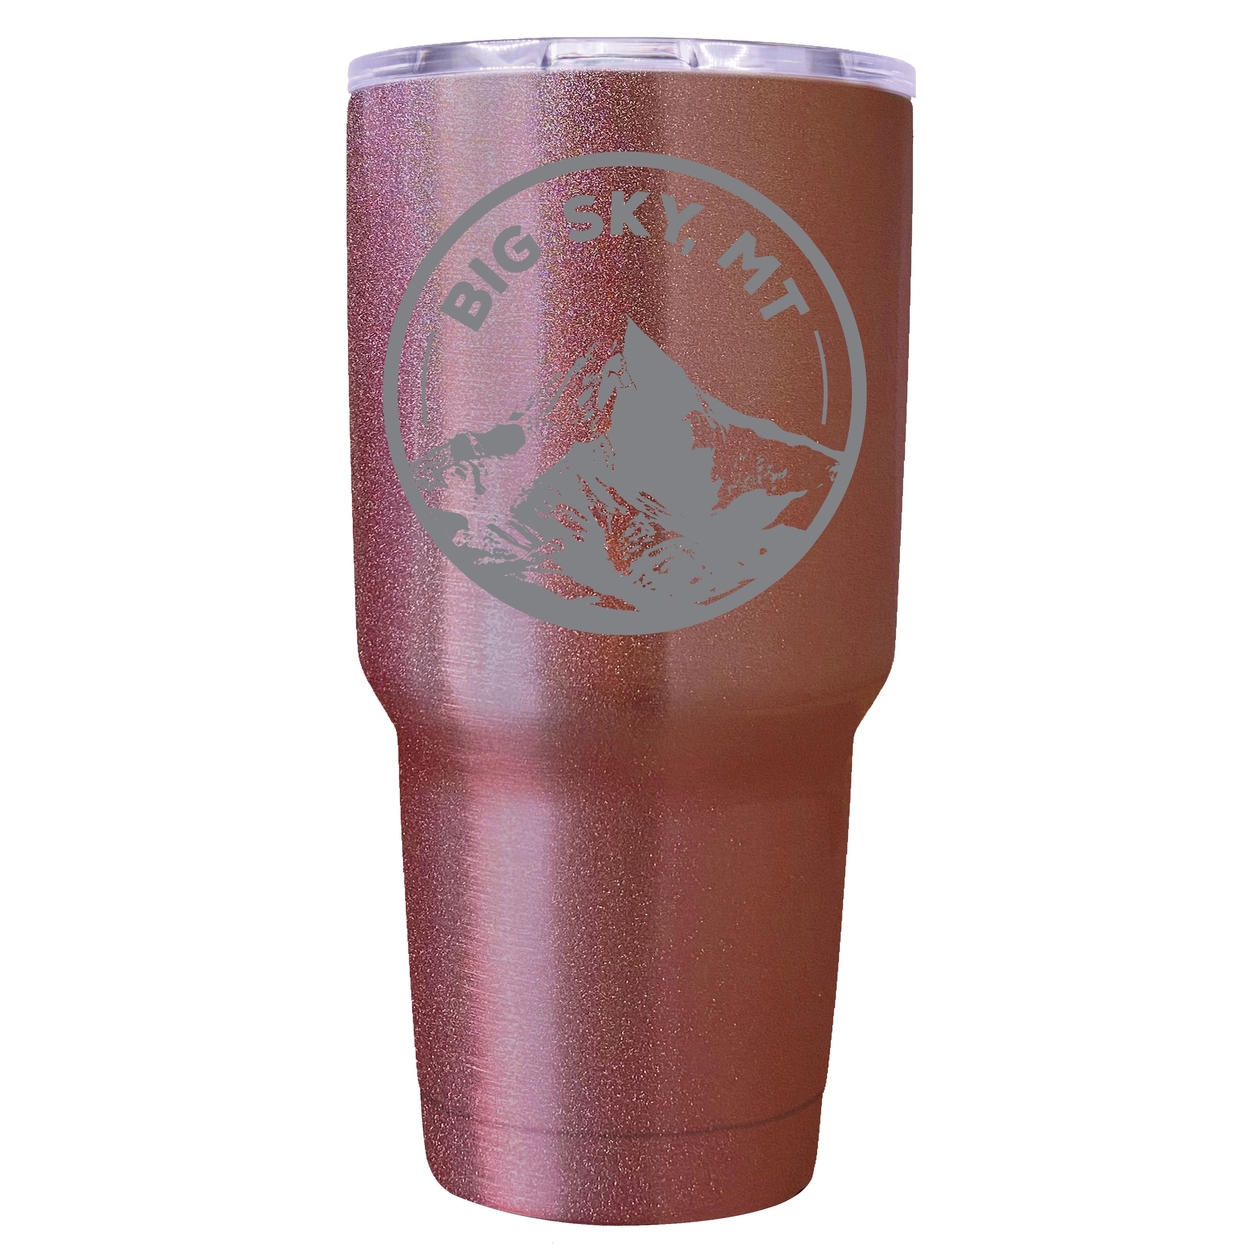 Big Sky Montana Souvenir 24 Oz Engraved Insulated Stainless Steel Tumbler - Rose Gold,,2-Pack